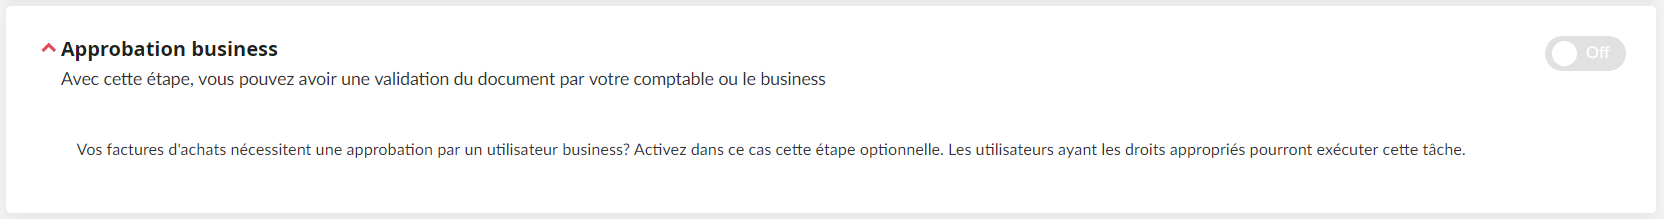 148-approbation-business.png